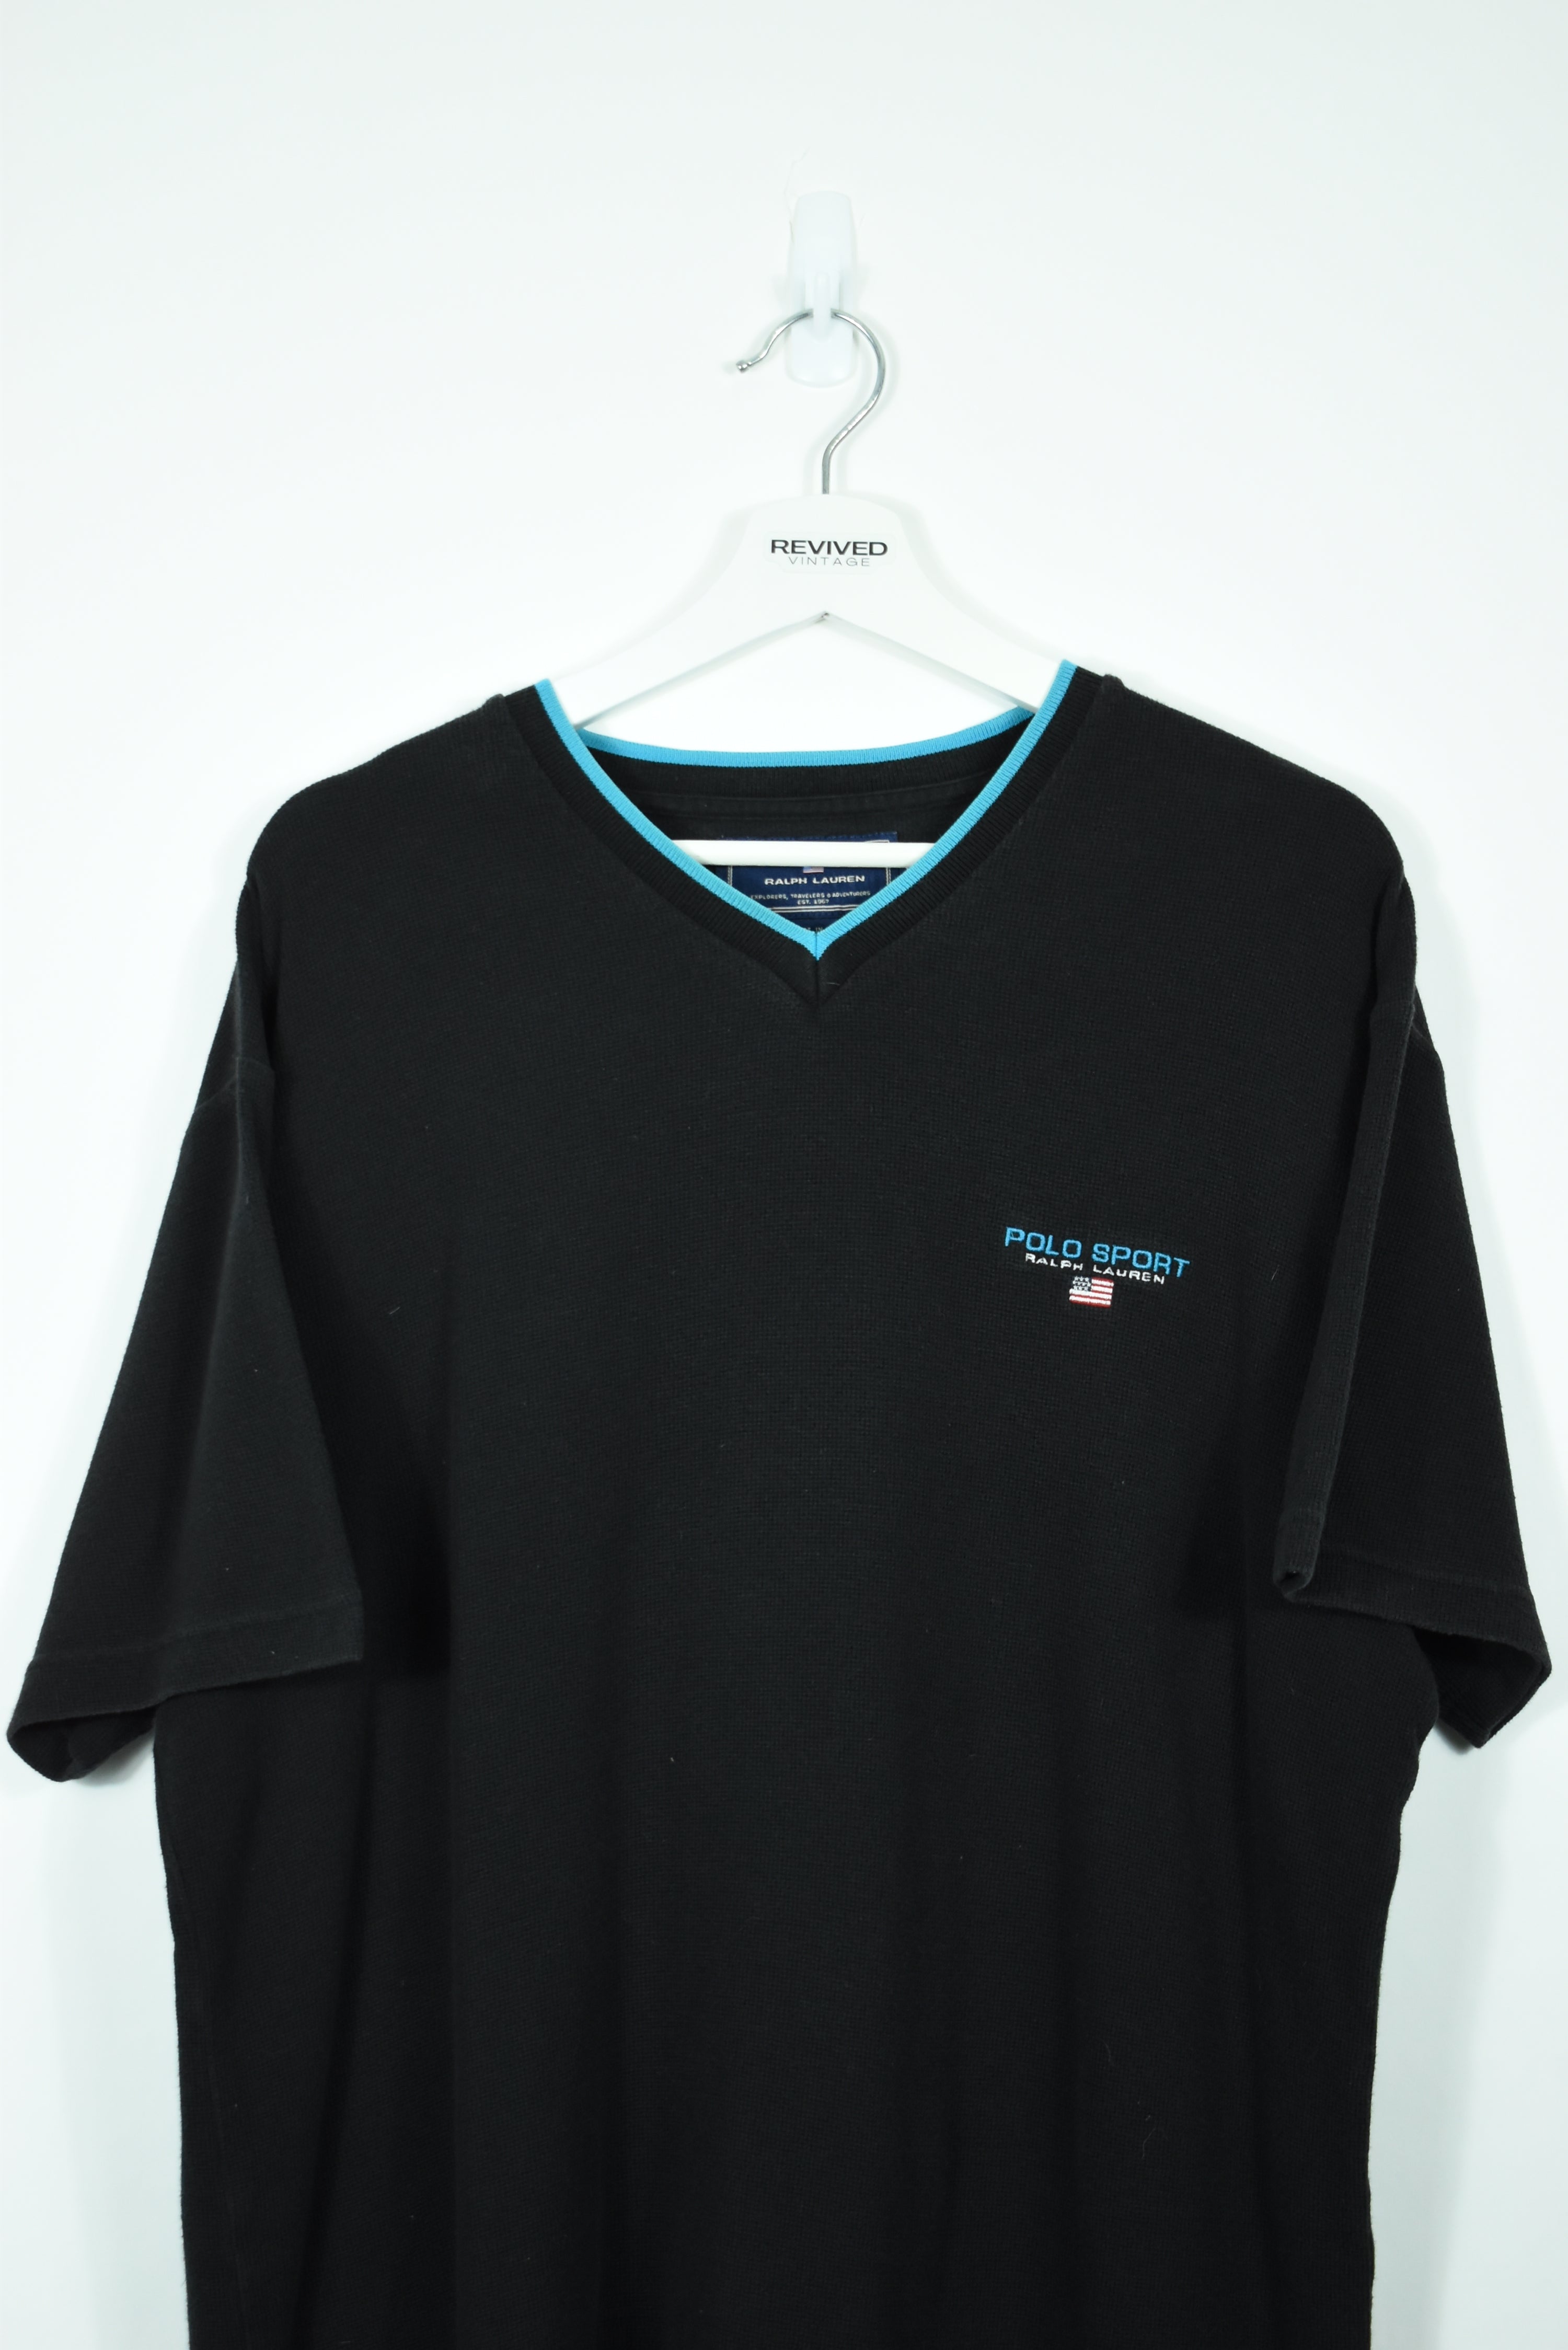 VINTAGE POLO SPORT EMBROIDERY T SHIRT LARGE